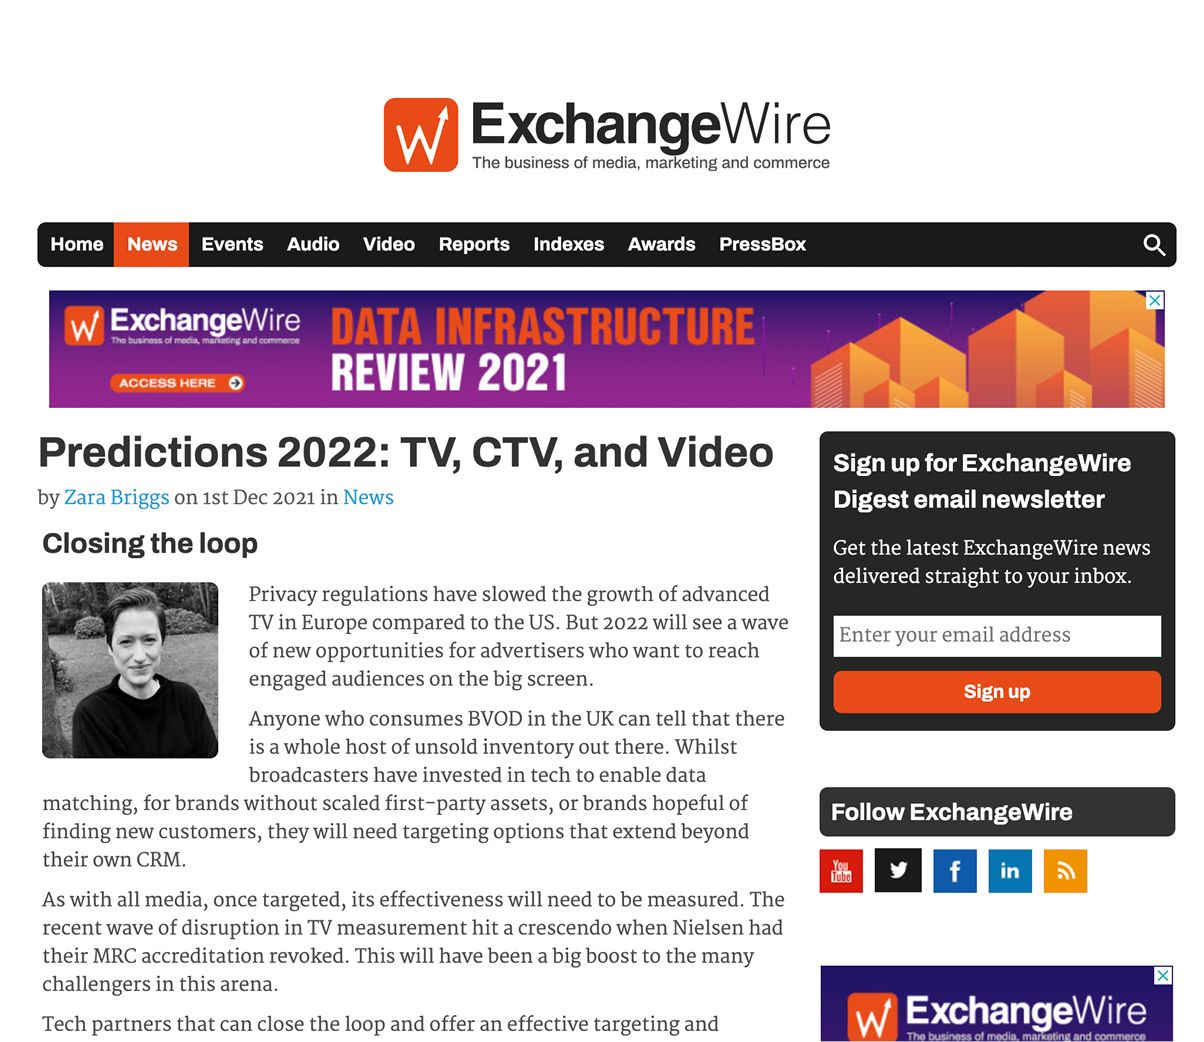 ExchangeWire: Captify’s Global VP of Product, Amelia Waddington Shares Her 2022 TV, CTV, and Video Predictions